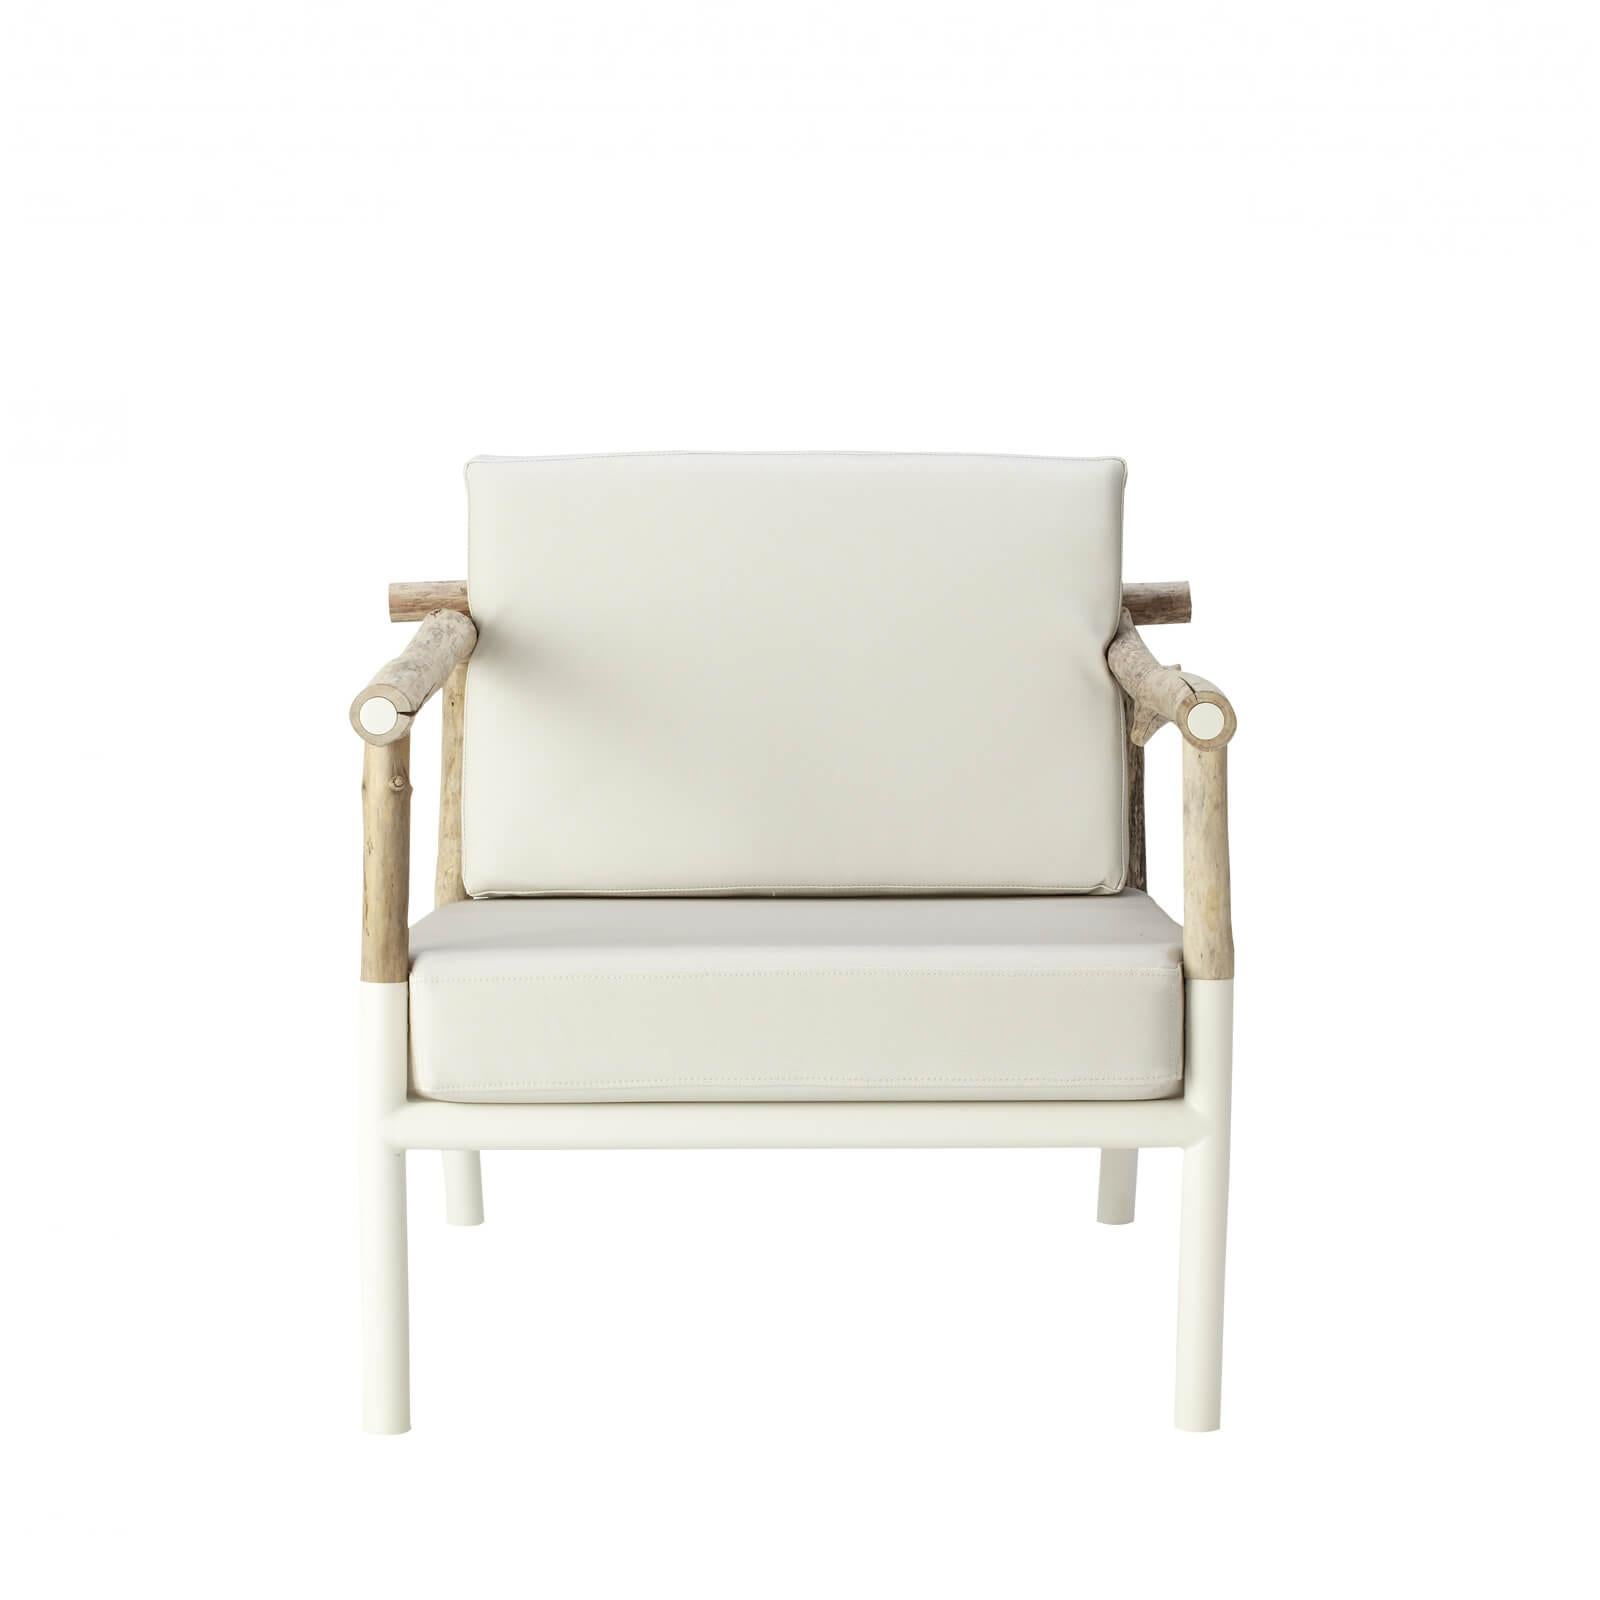 spectacular combination of Organic & modern. Our Outli Chair is a perfect addition to a Living Room, a Patio or even a formal room. Custom / COM options available 